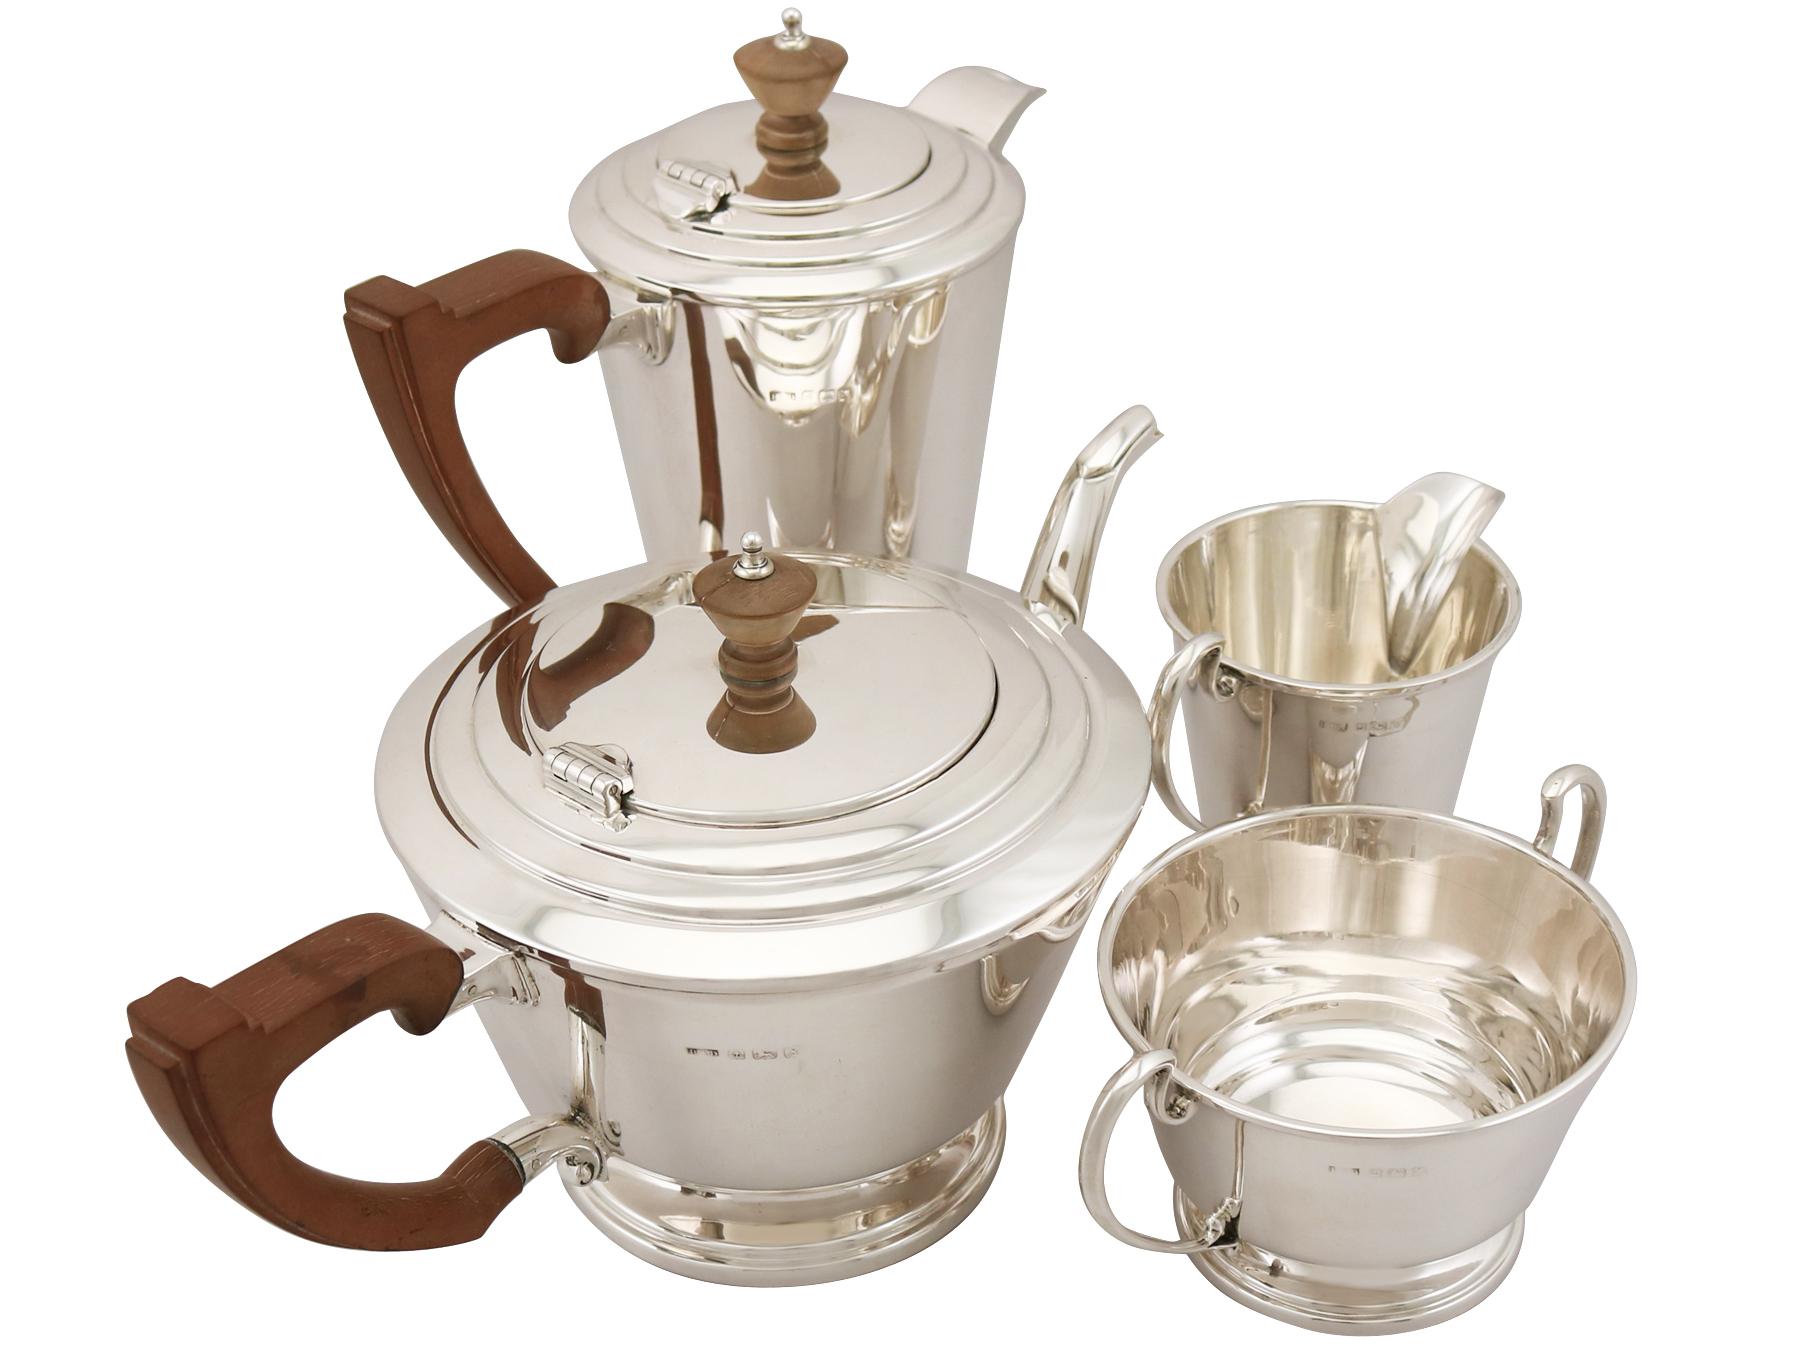 A fine and impressive vintage George VI English sterling silver four piece tea and coffee service in the Art Deco style; an addition to our teaware collection.

This fine vintage George VI sterling silver four piece tea and coffee service/set